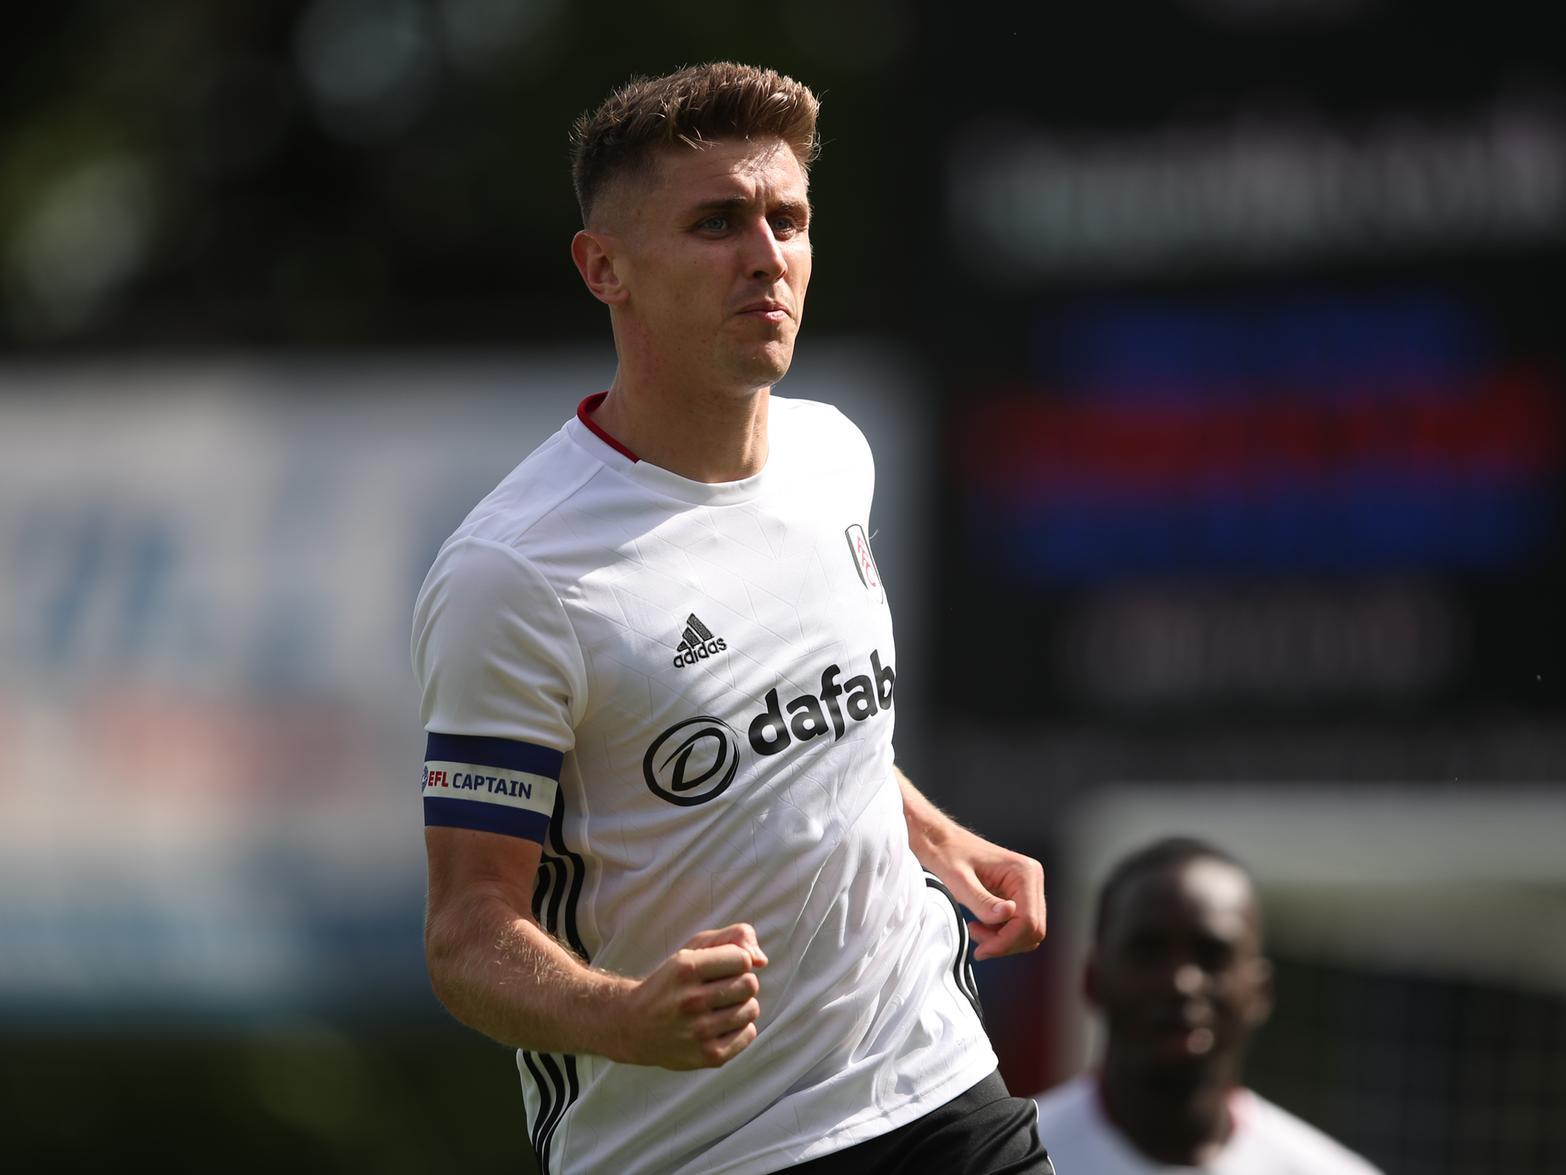 Fulham captain Tom Cairney has revealed that he's desperate not to go down the route of the play-offs this season, and that his side have their sights set on automatic promotion. (Sky Sports)